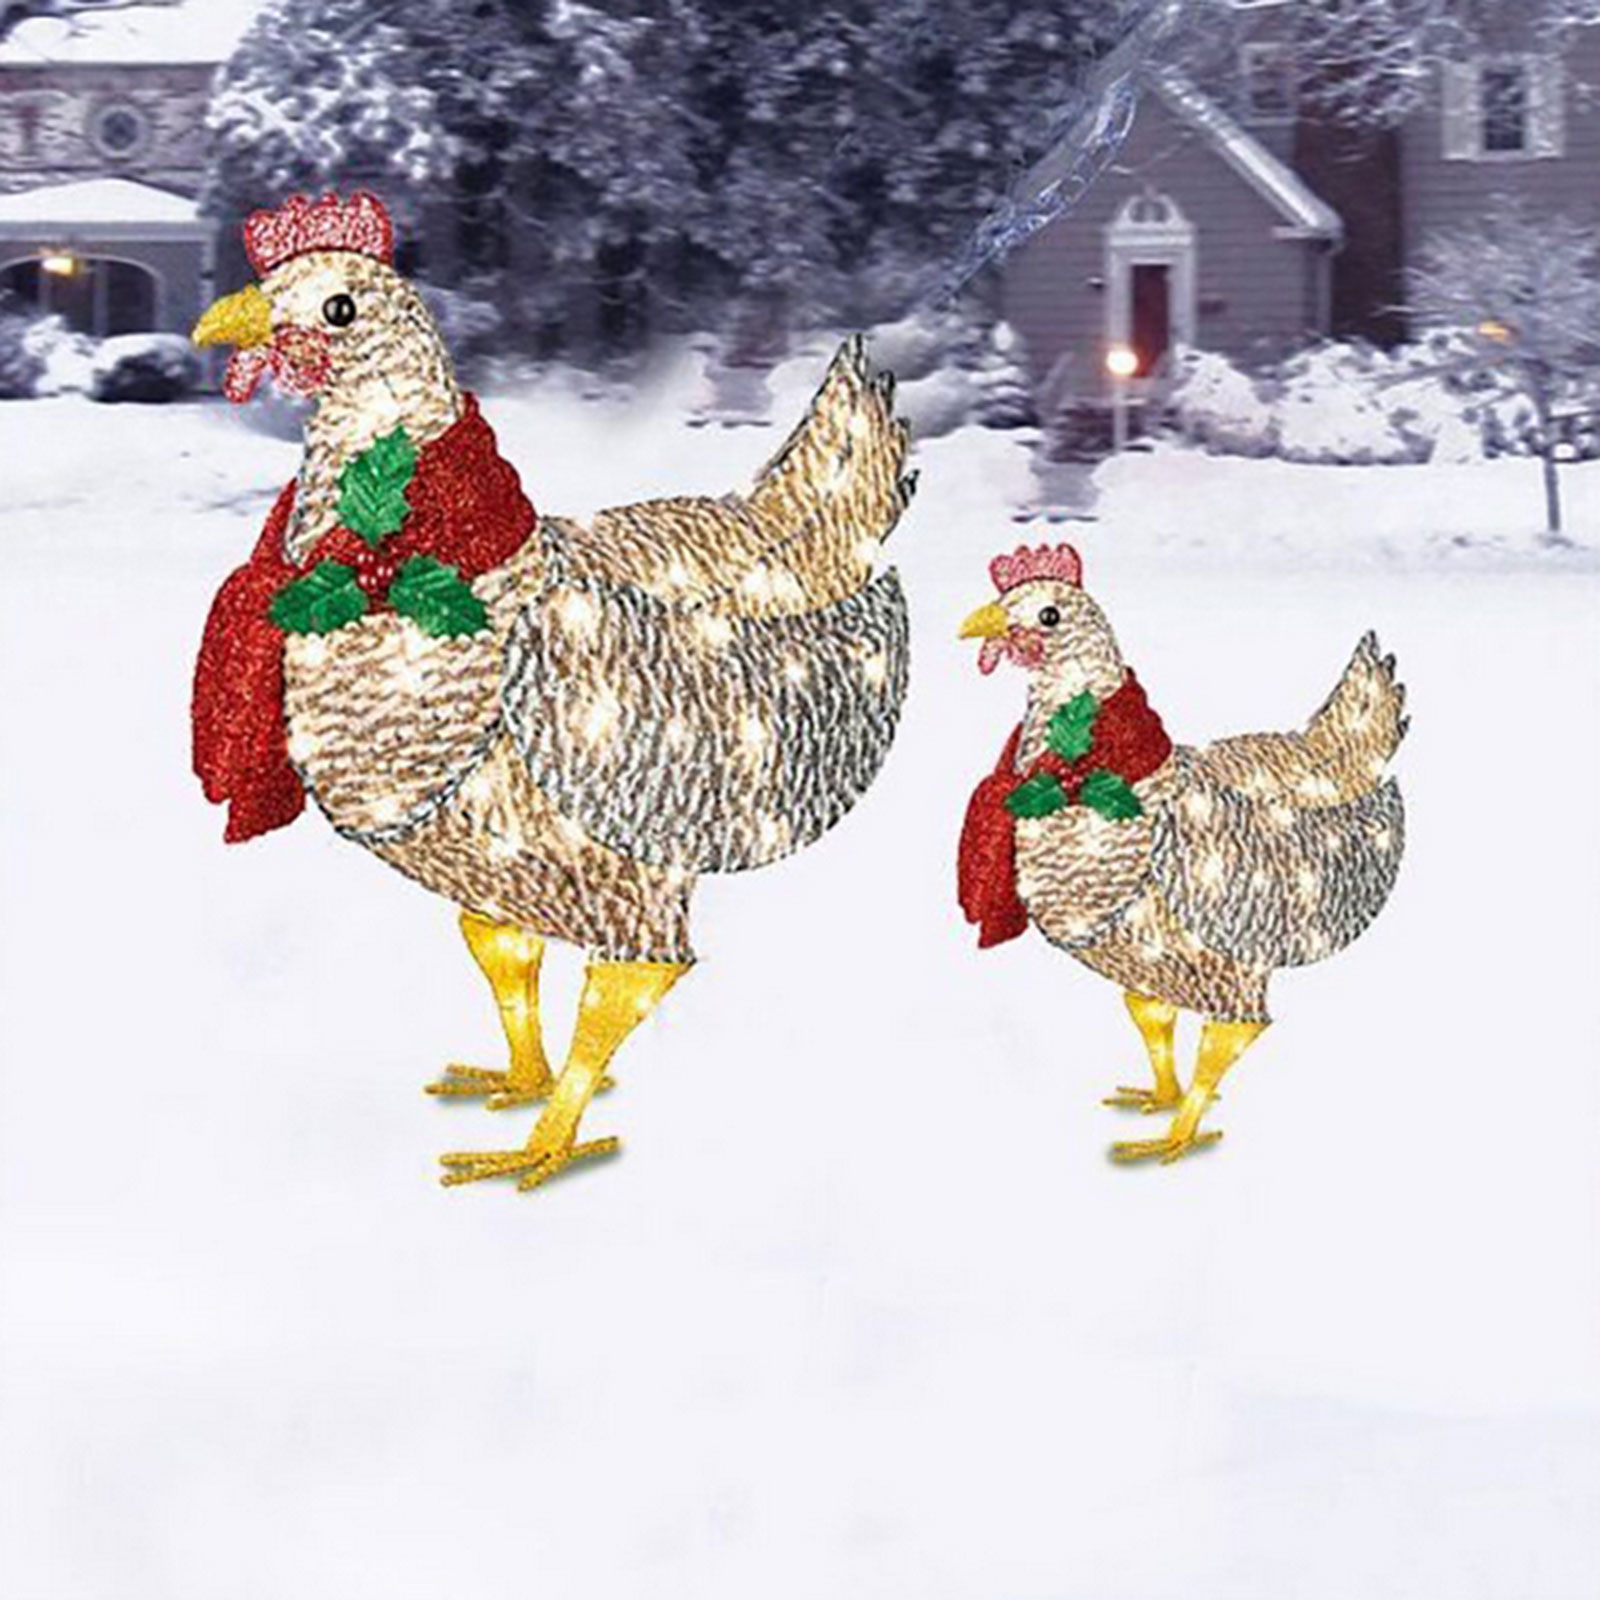 Christmas Light-Up Chicken with Scarf Holiday Decoration Light Yard Garden Xmas Atmosphere Ornaments Outdoor Garden Decoration